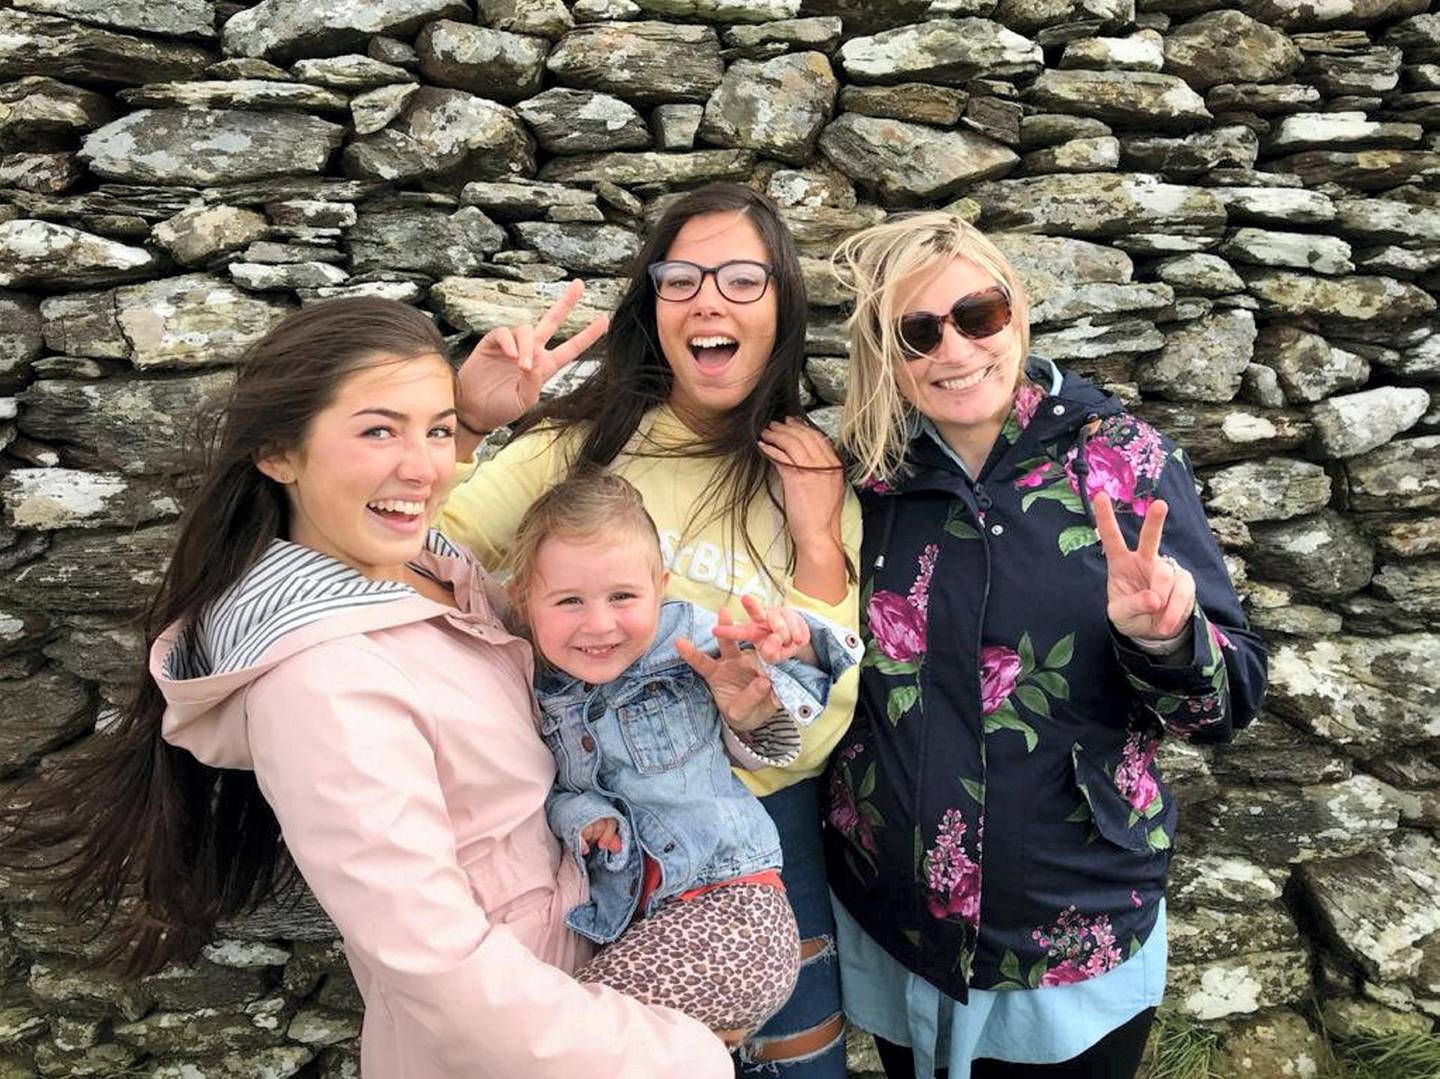 Paula Burns with her stepdaughters Nayana and Neva, and her biological daughter, Amelia, 4 